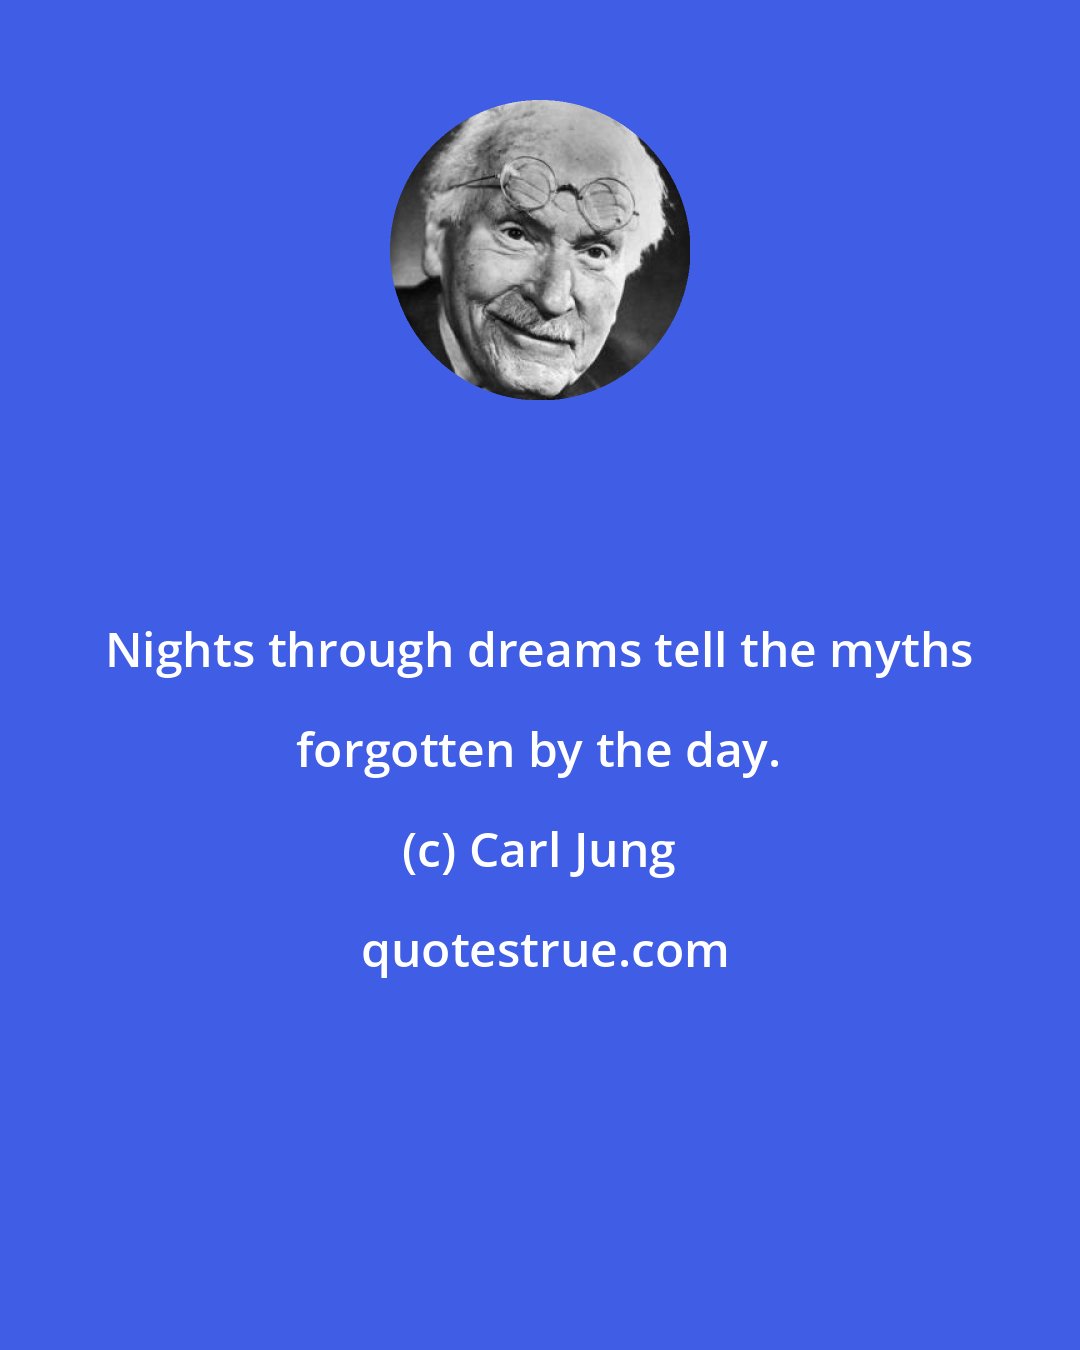 Carl Jung: Nights through dreams tell the myths forgotten by the day.